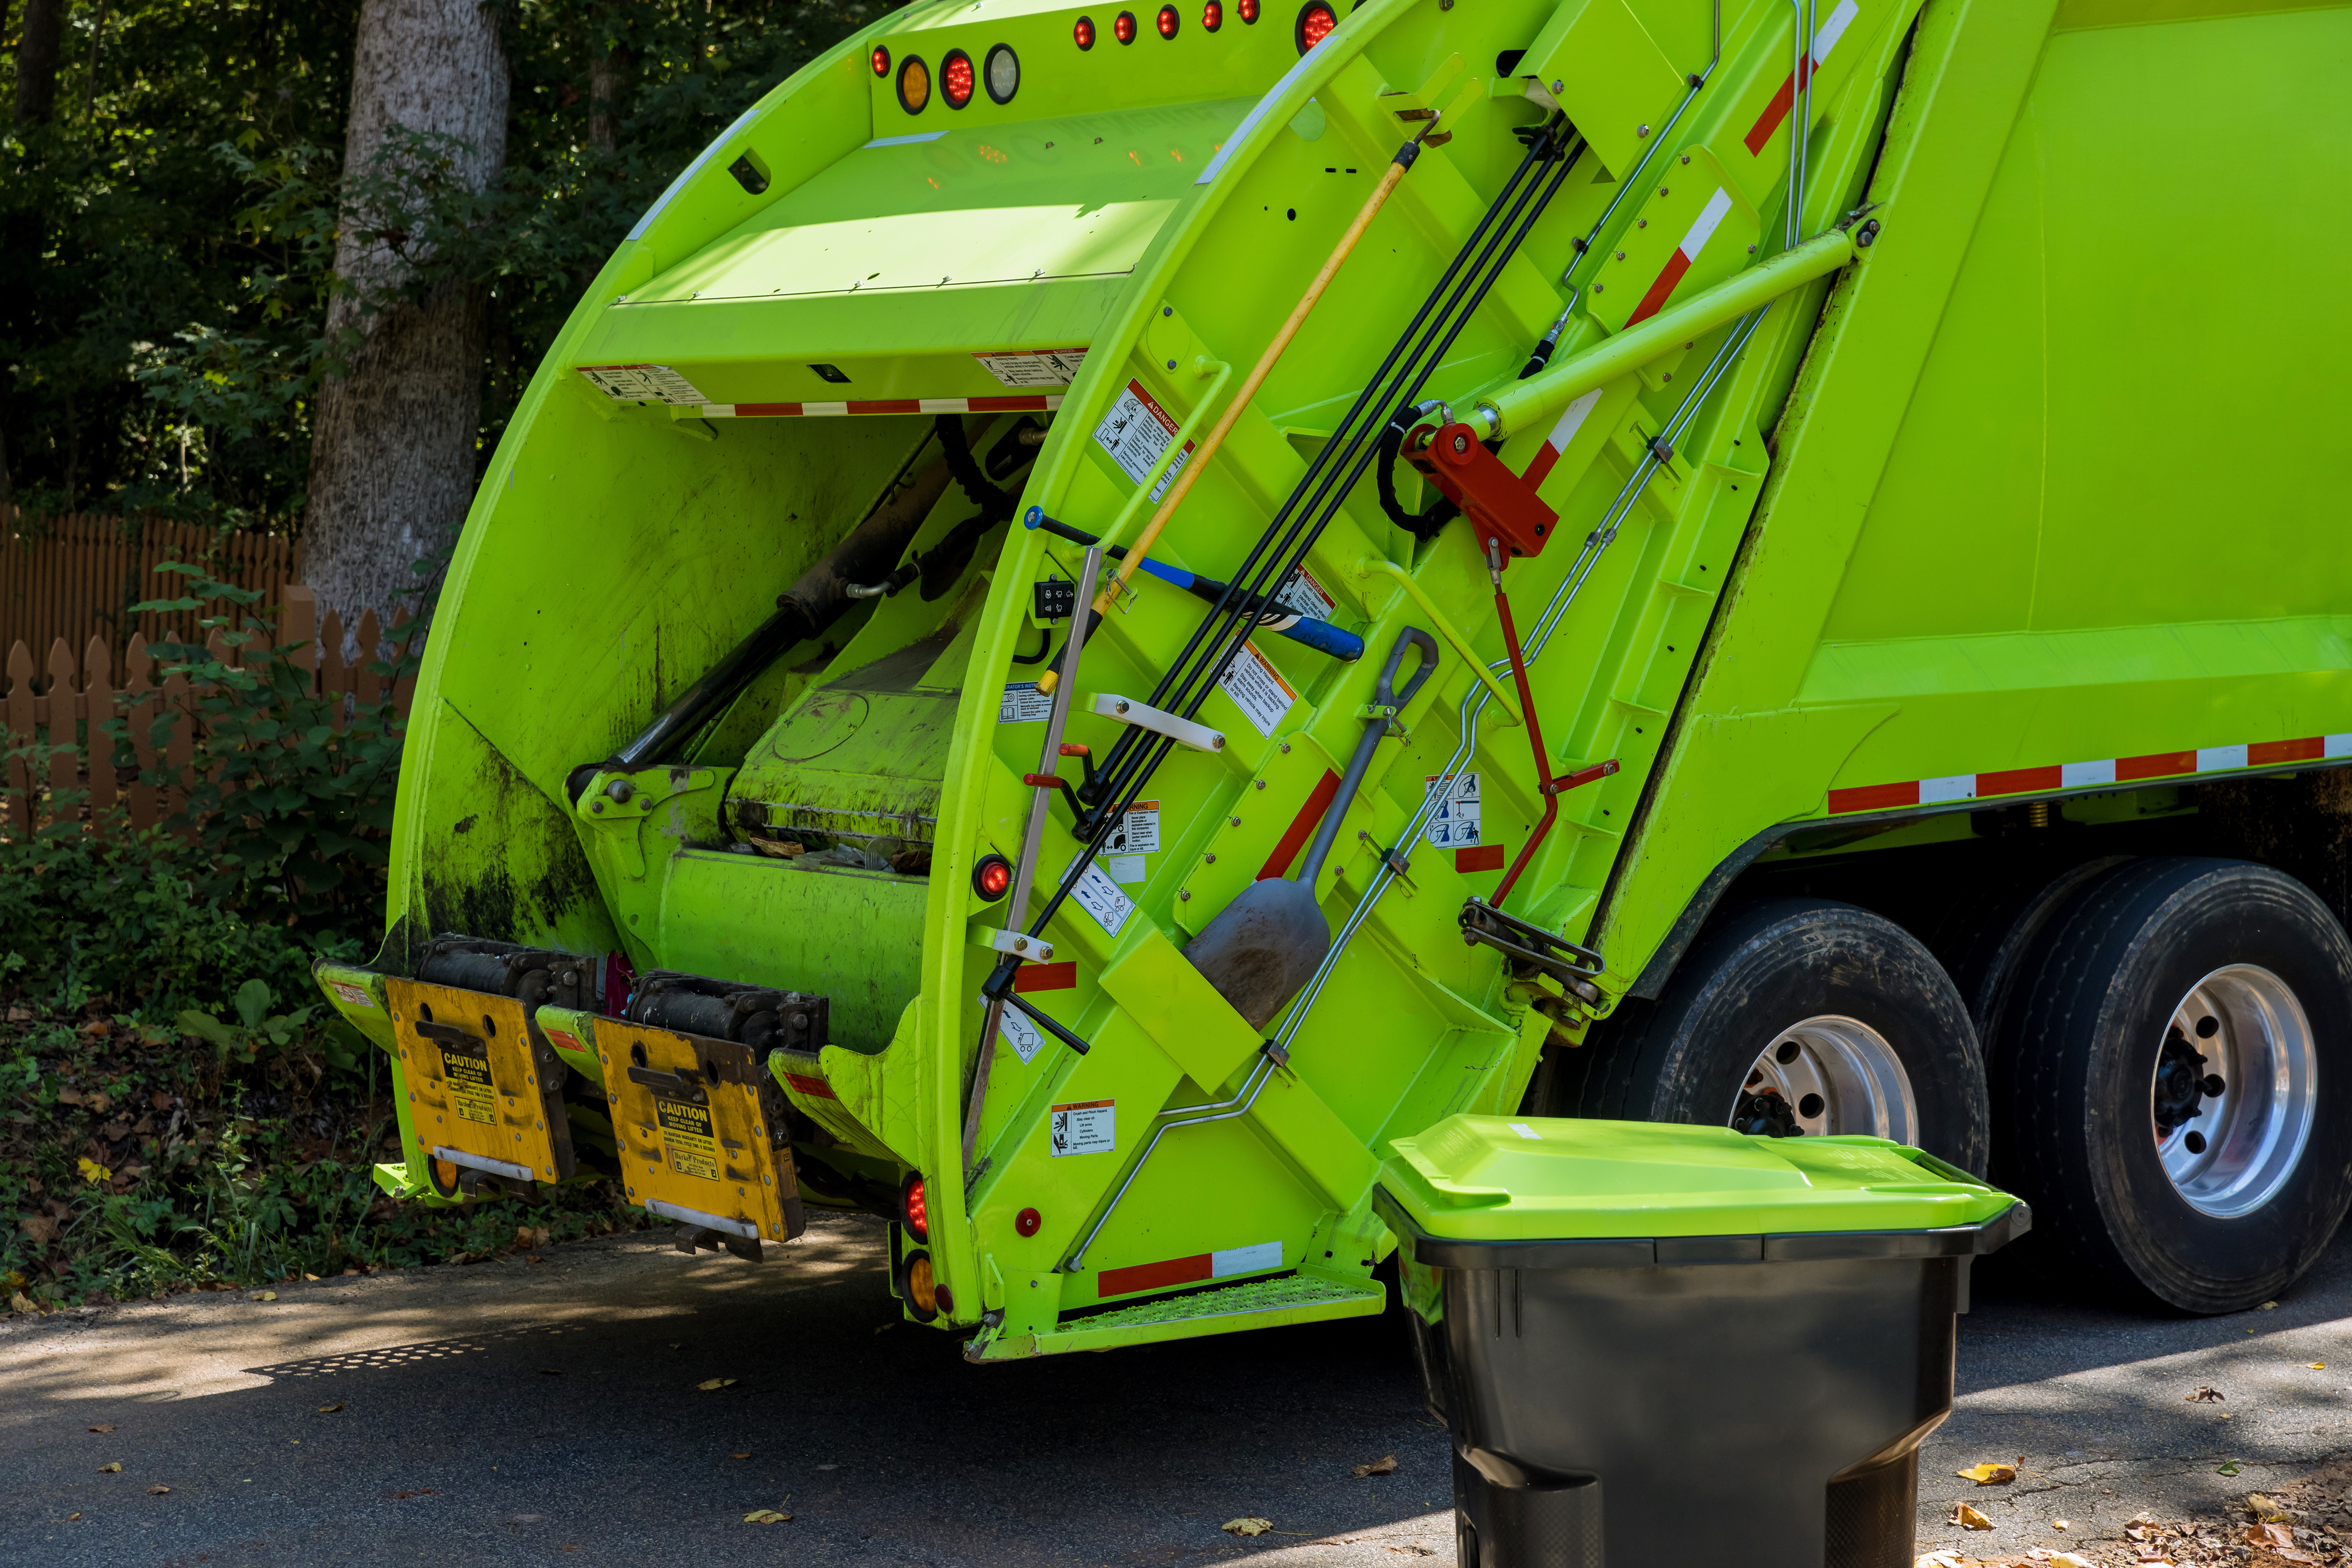 Truck for mixed domestic waste collection in residential areas